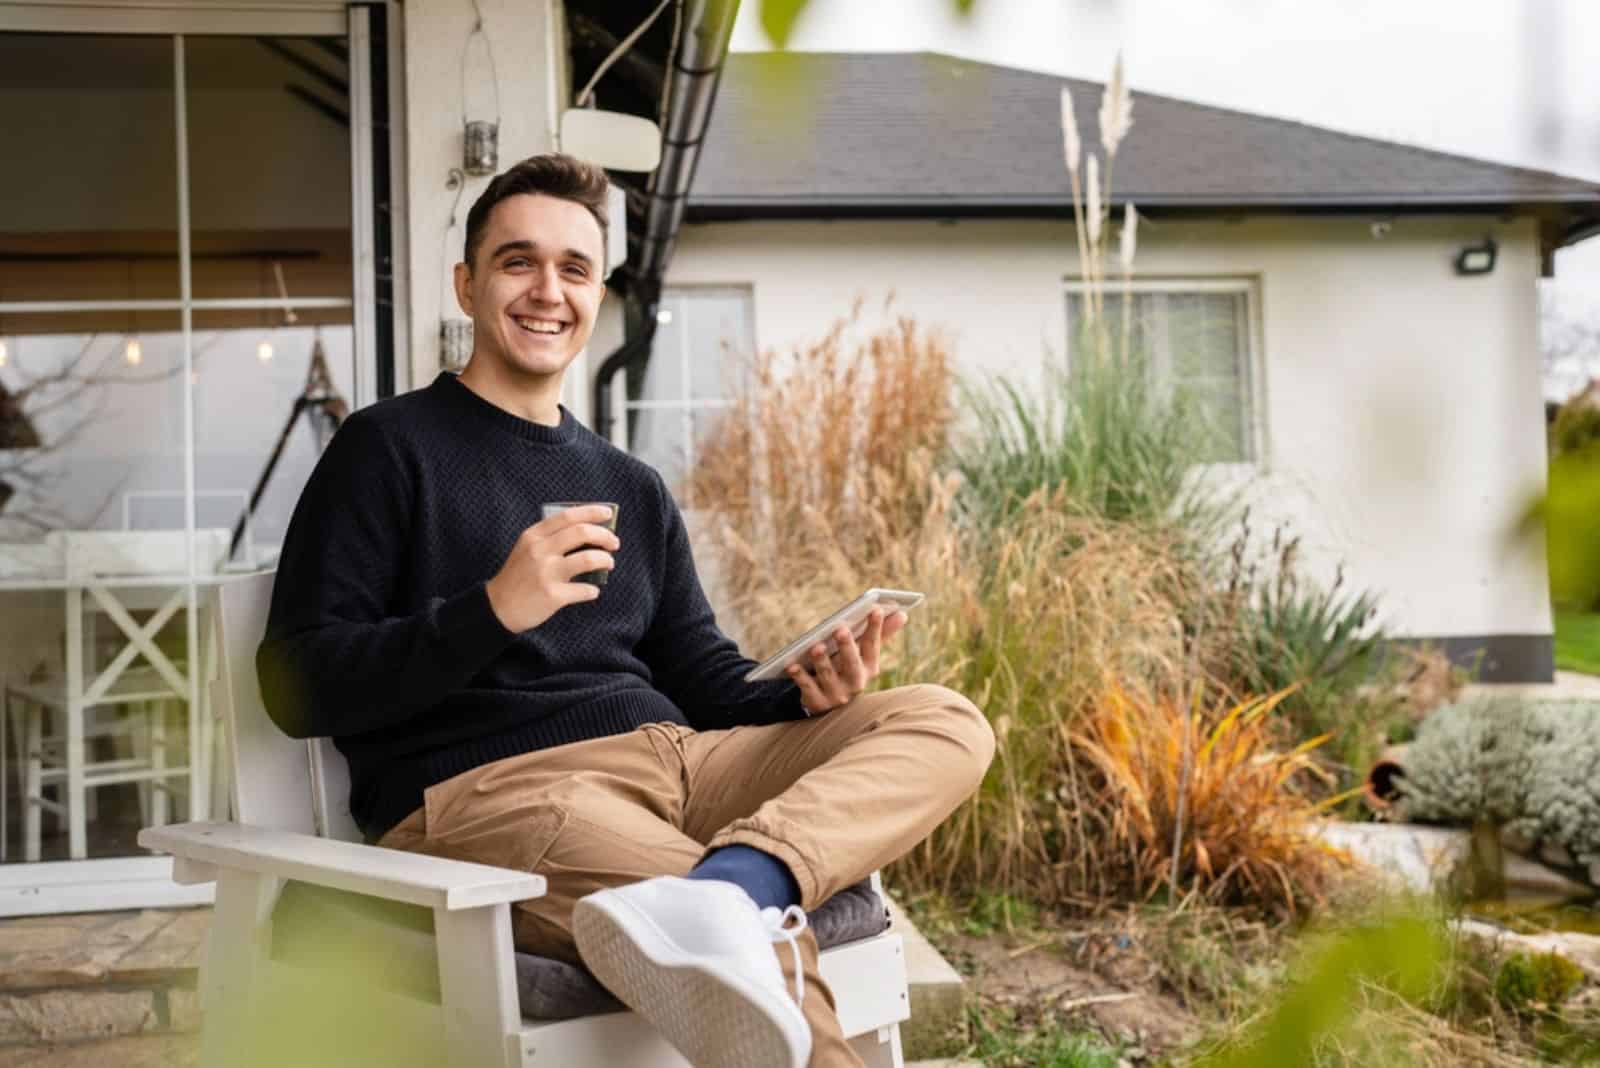 a smiling man is sitting on a chair